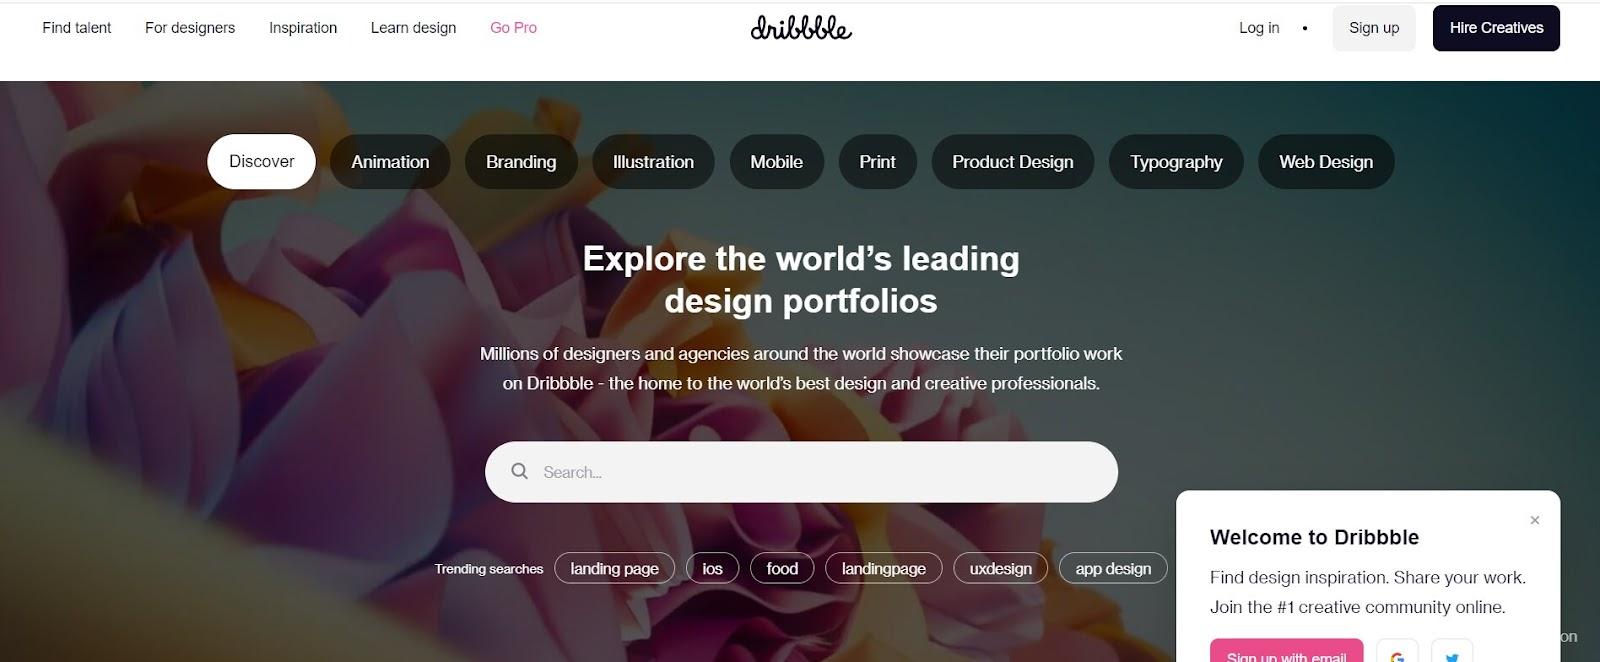 Resources for brand logo inspiration: Dribble